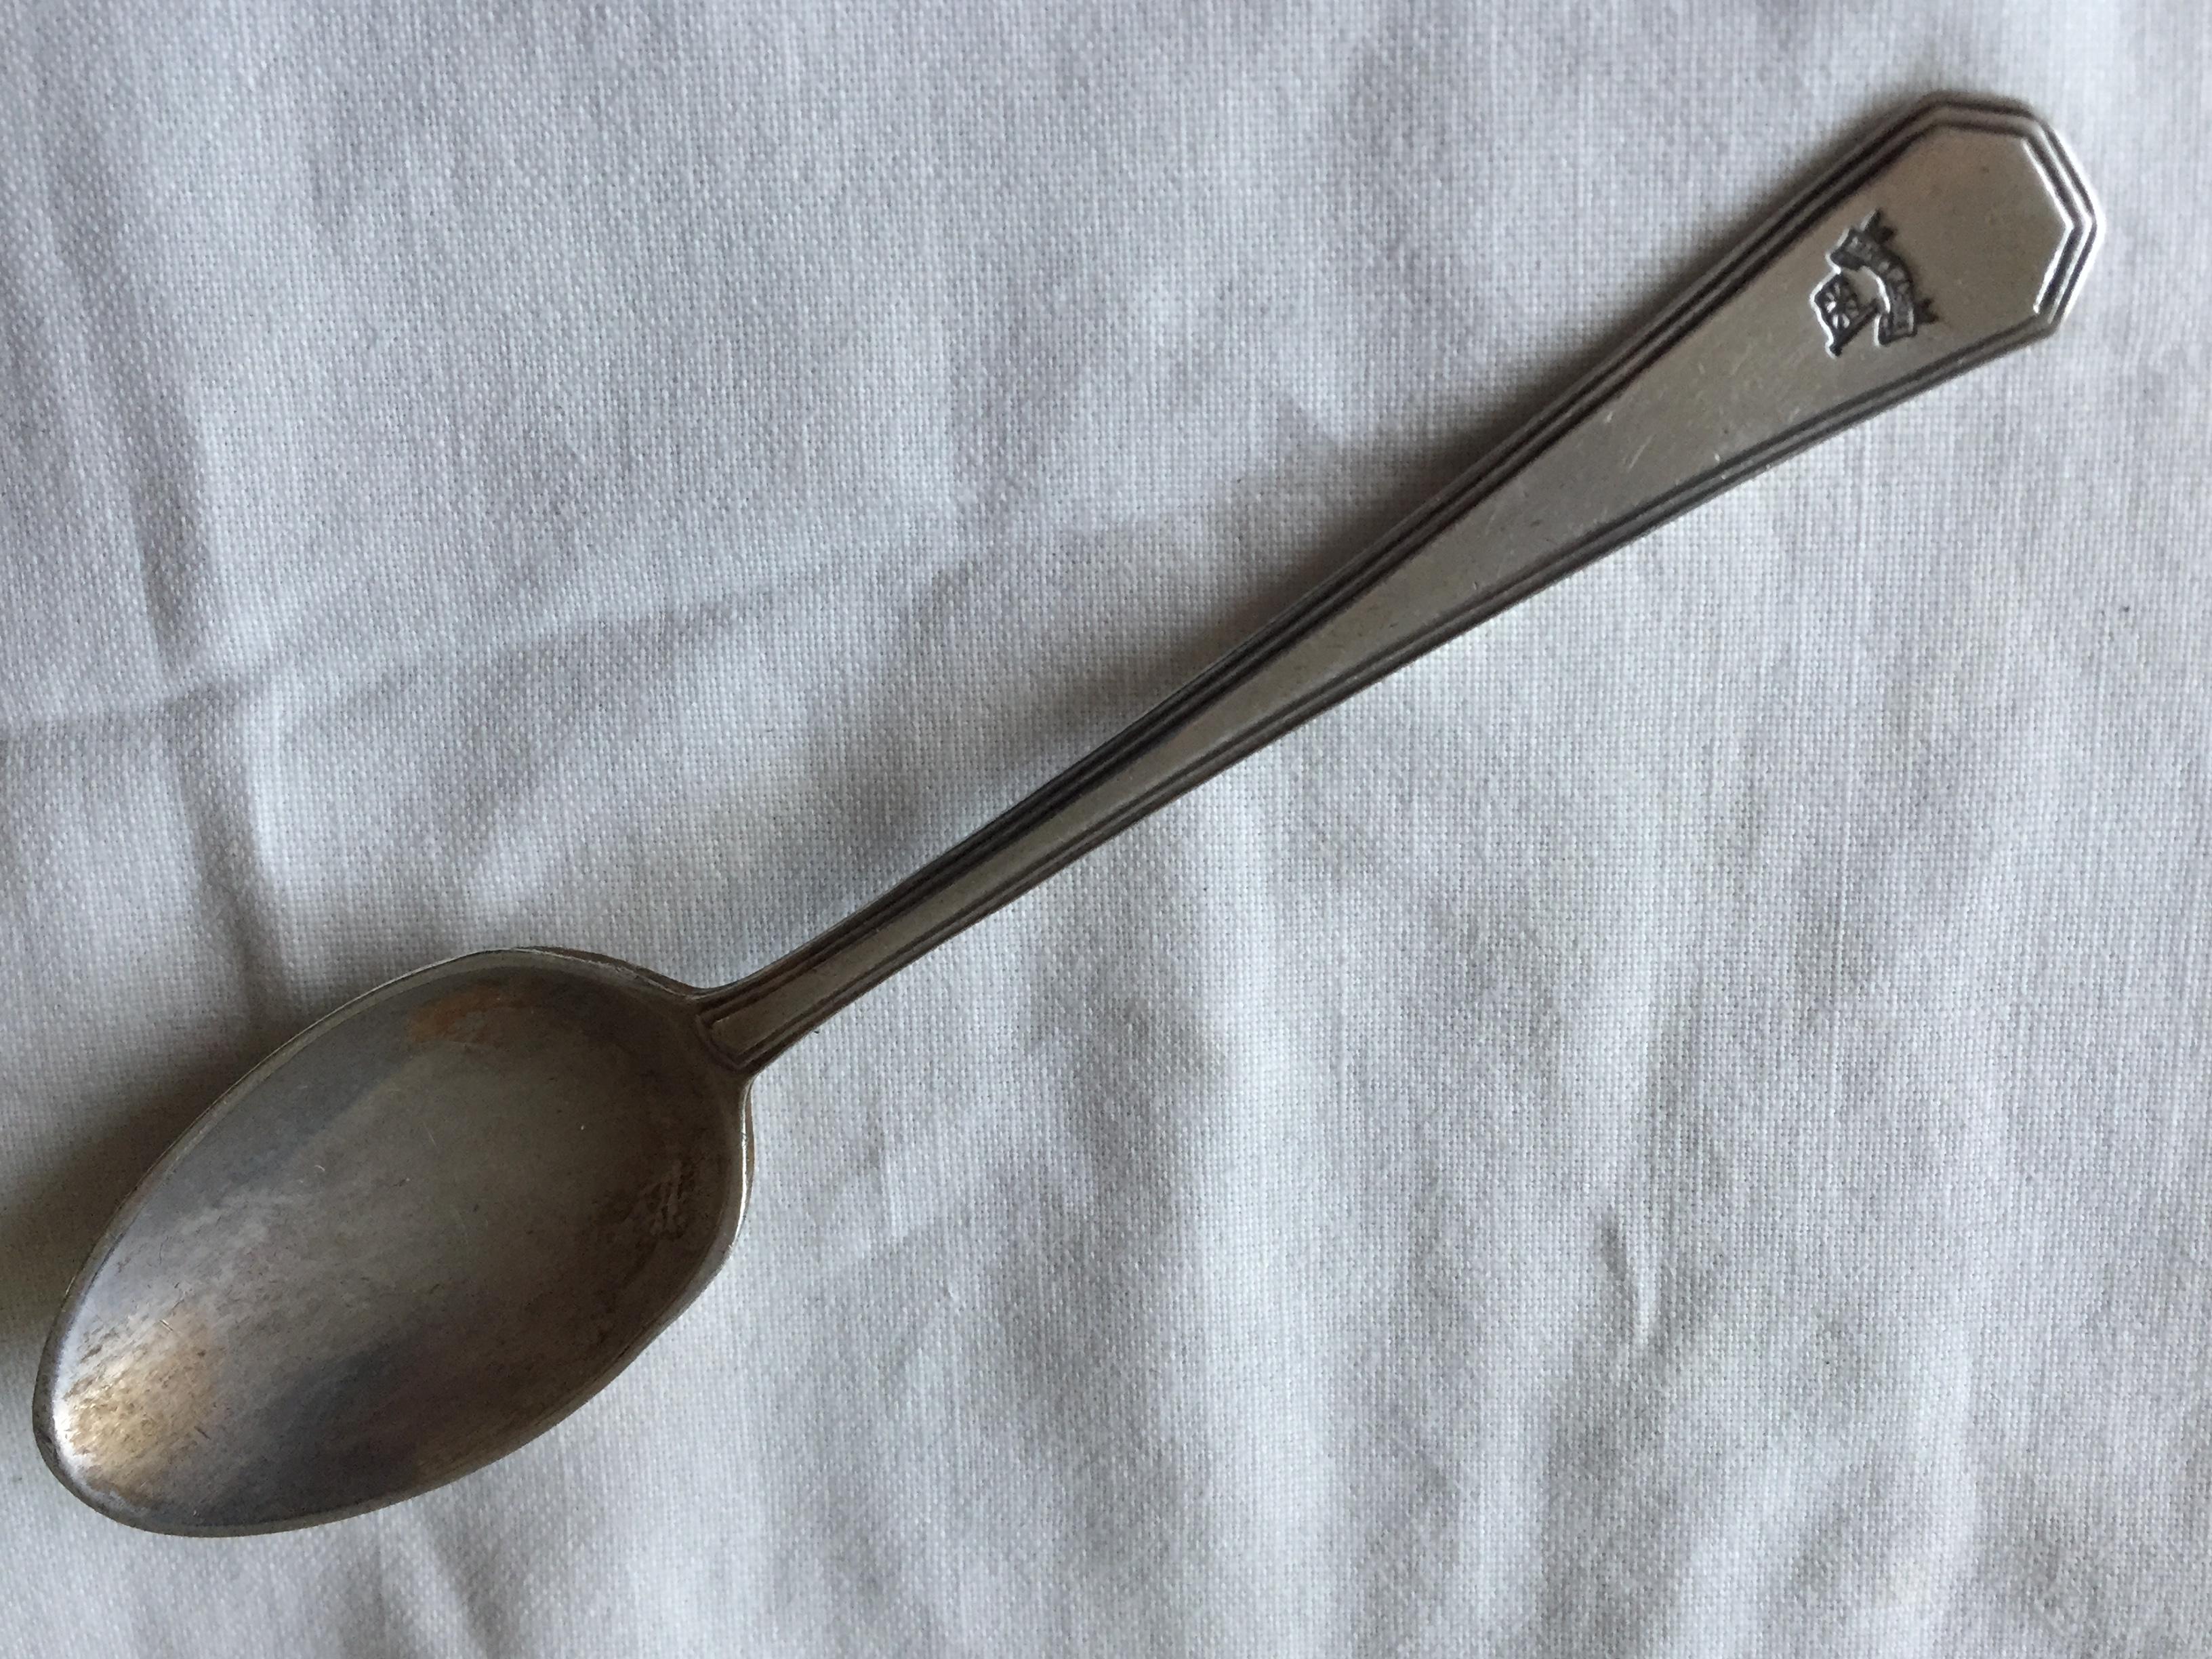 AS USED IN SERVICE TEA SPOON FROM THE PORT LINE 